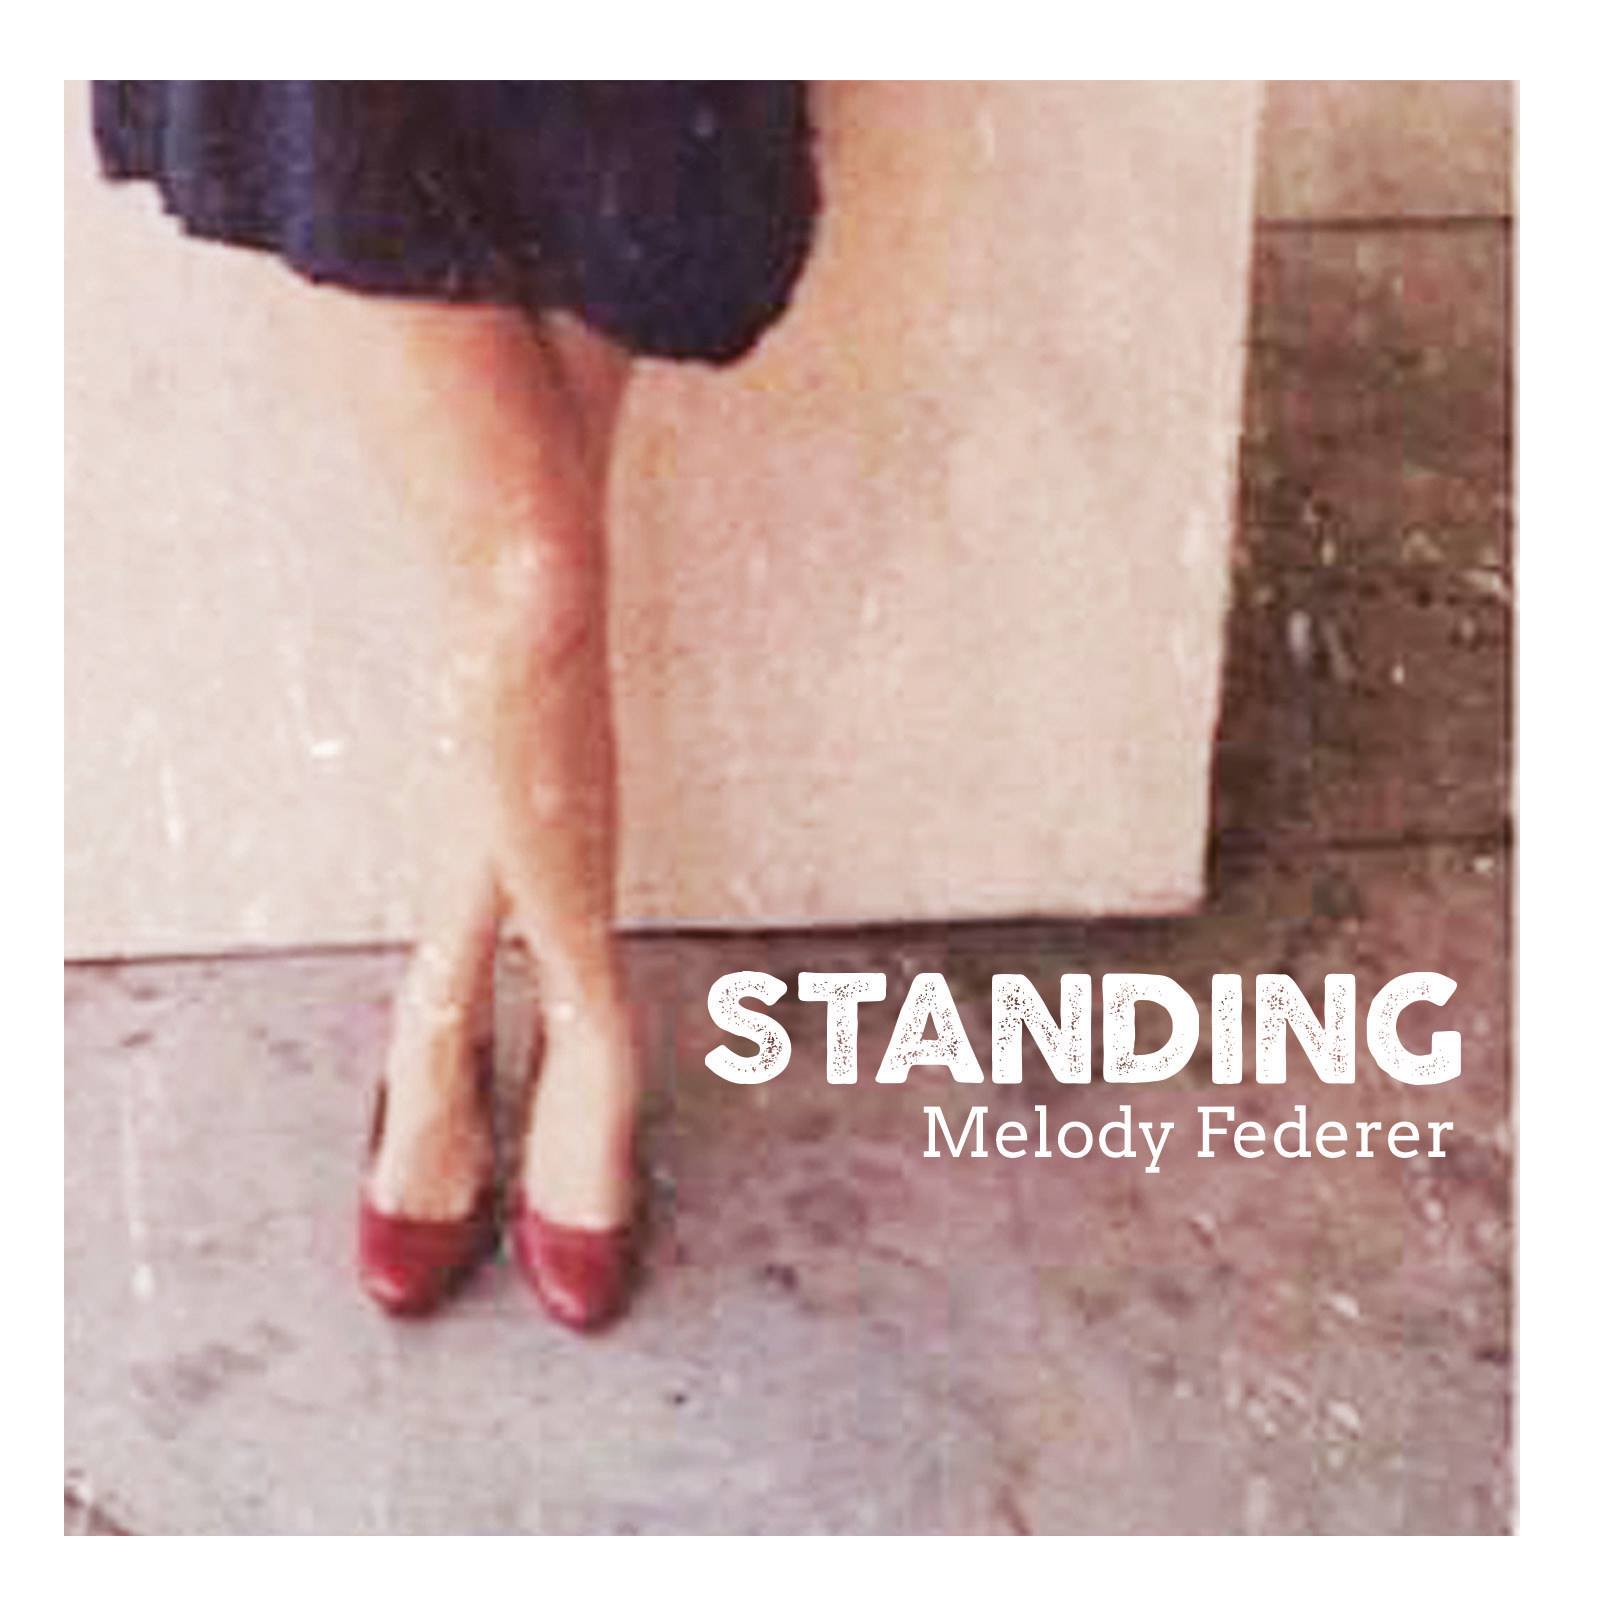 Melody Federer - "Standing"